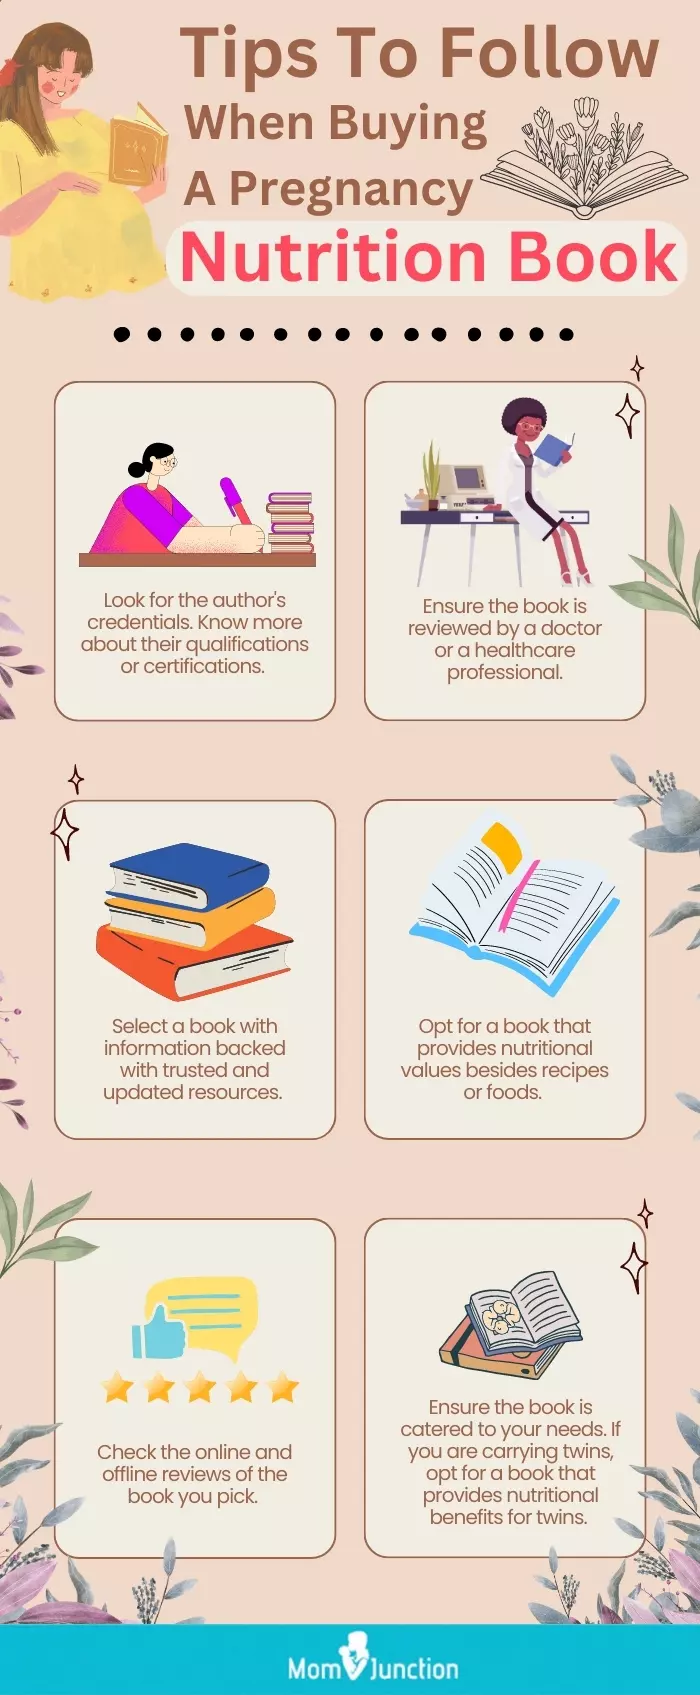 Tips To Follow When Buying A Pregnancy Nutrition Book (infographic)